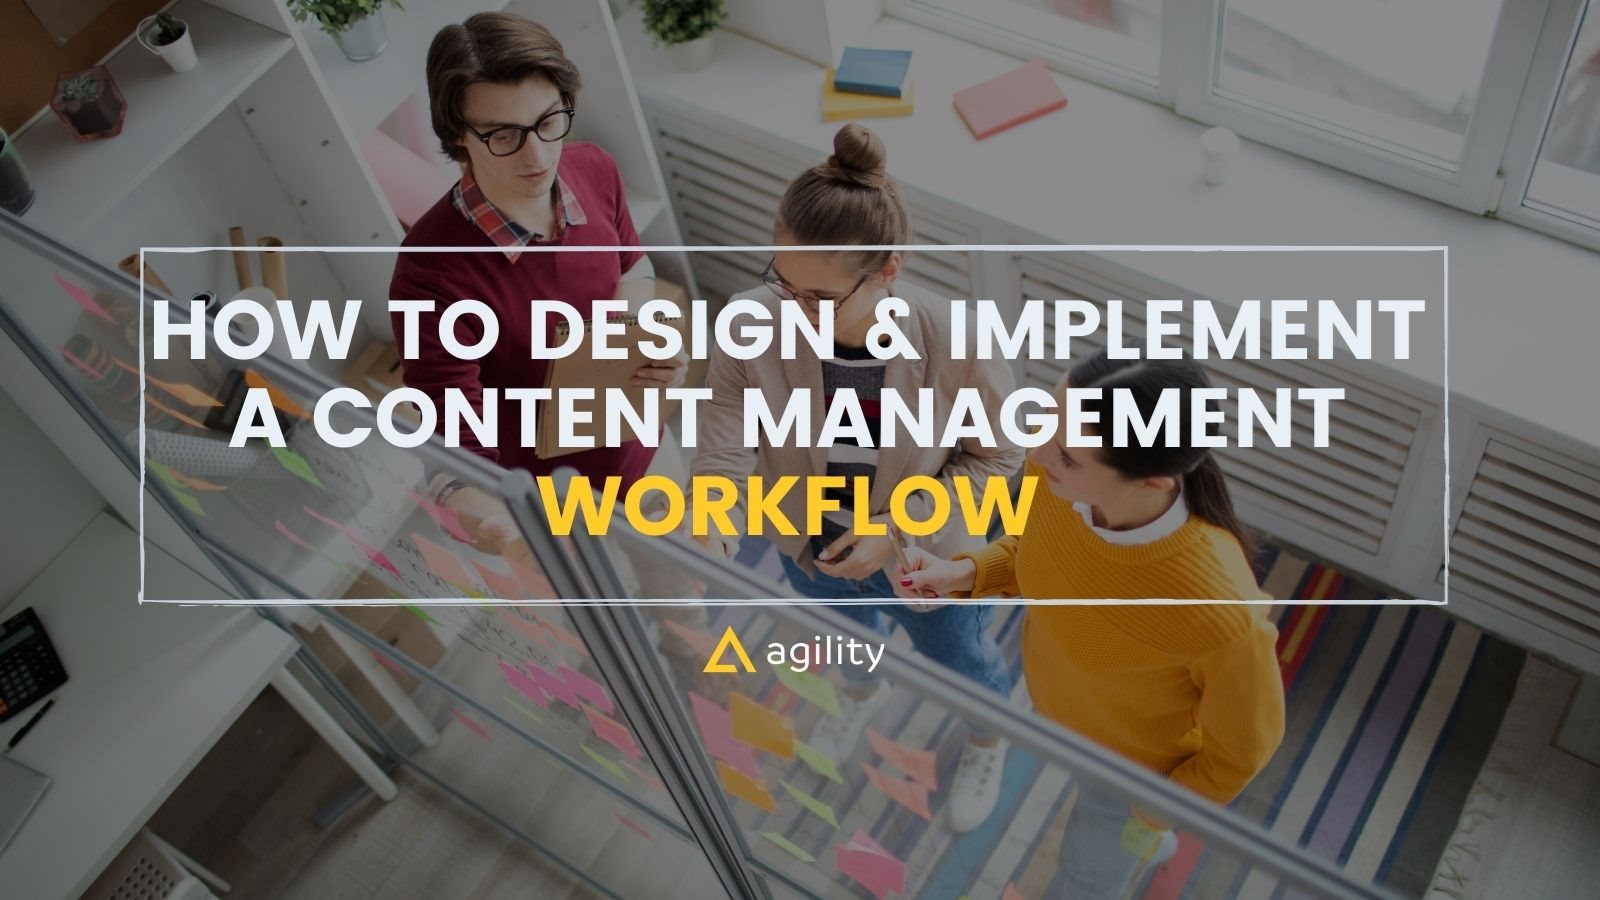  Implementing a Content Management Workflow on agilitycms.com